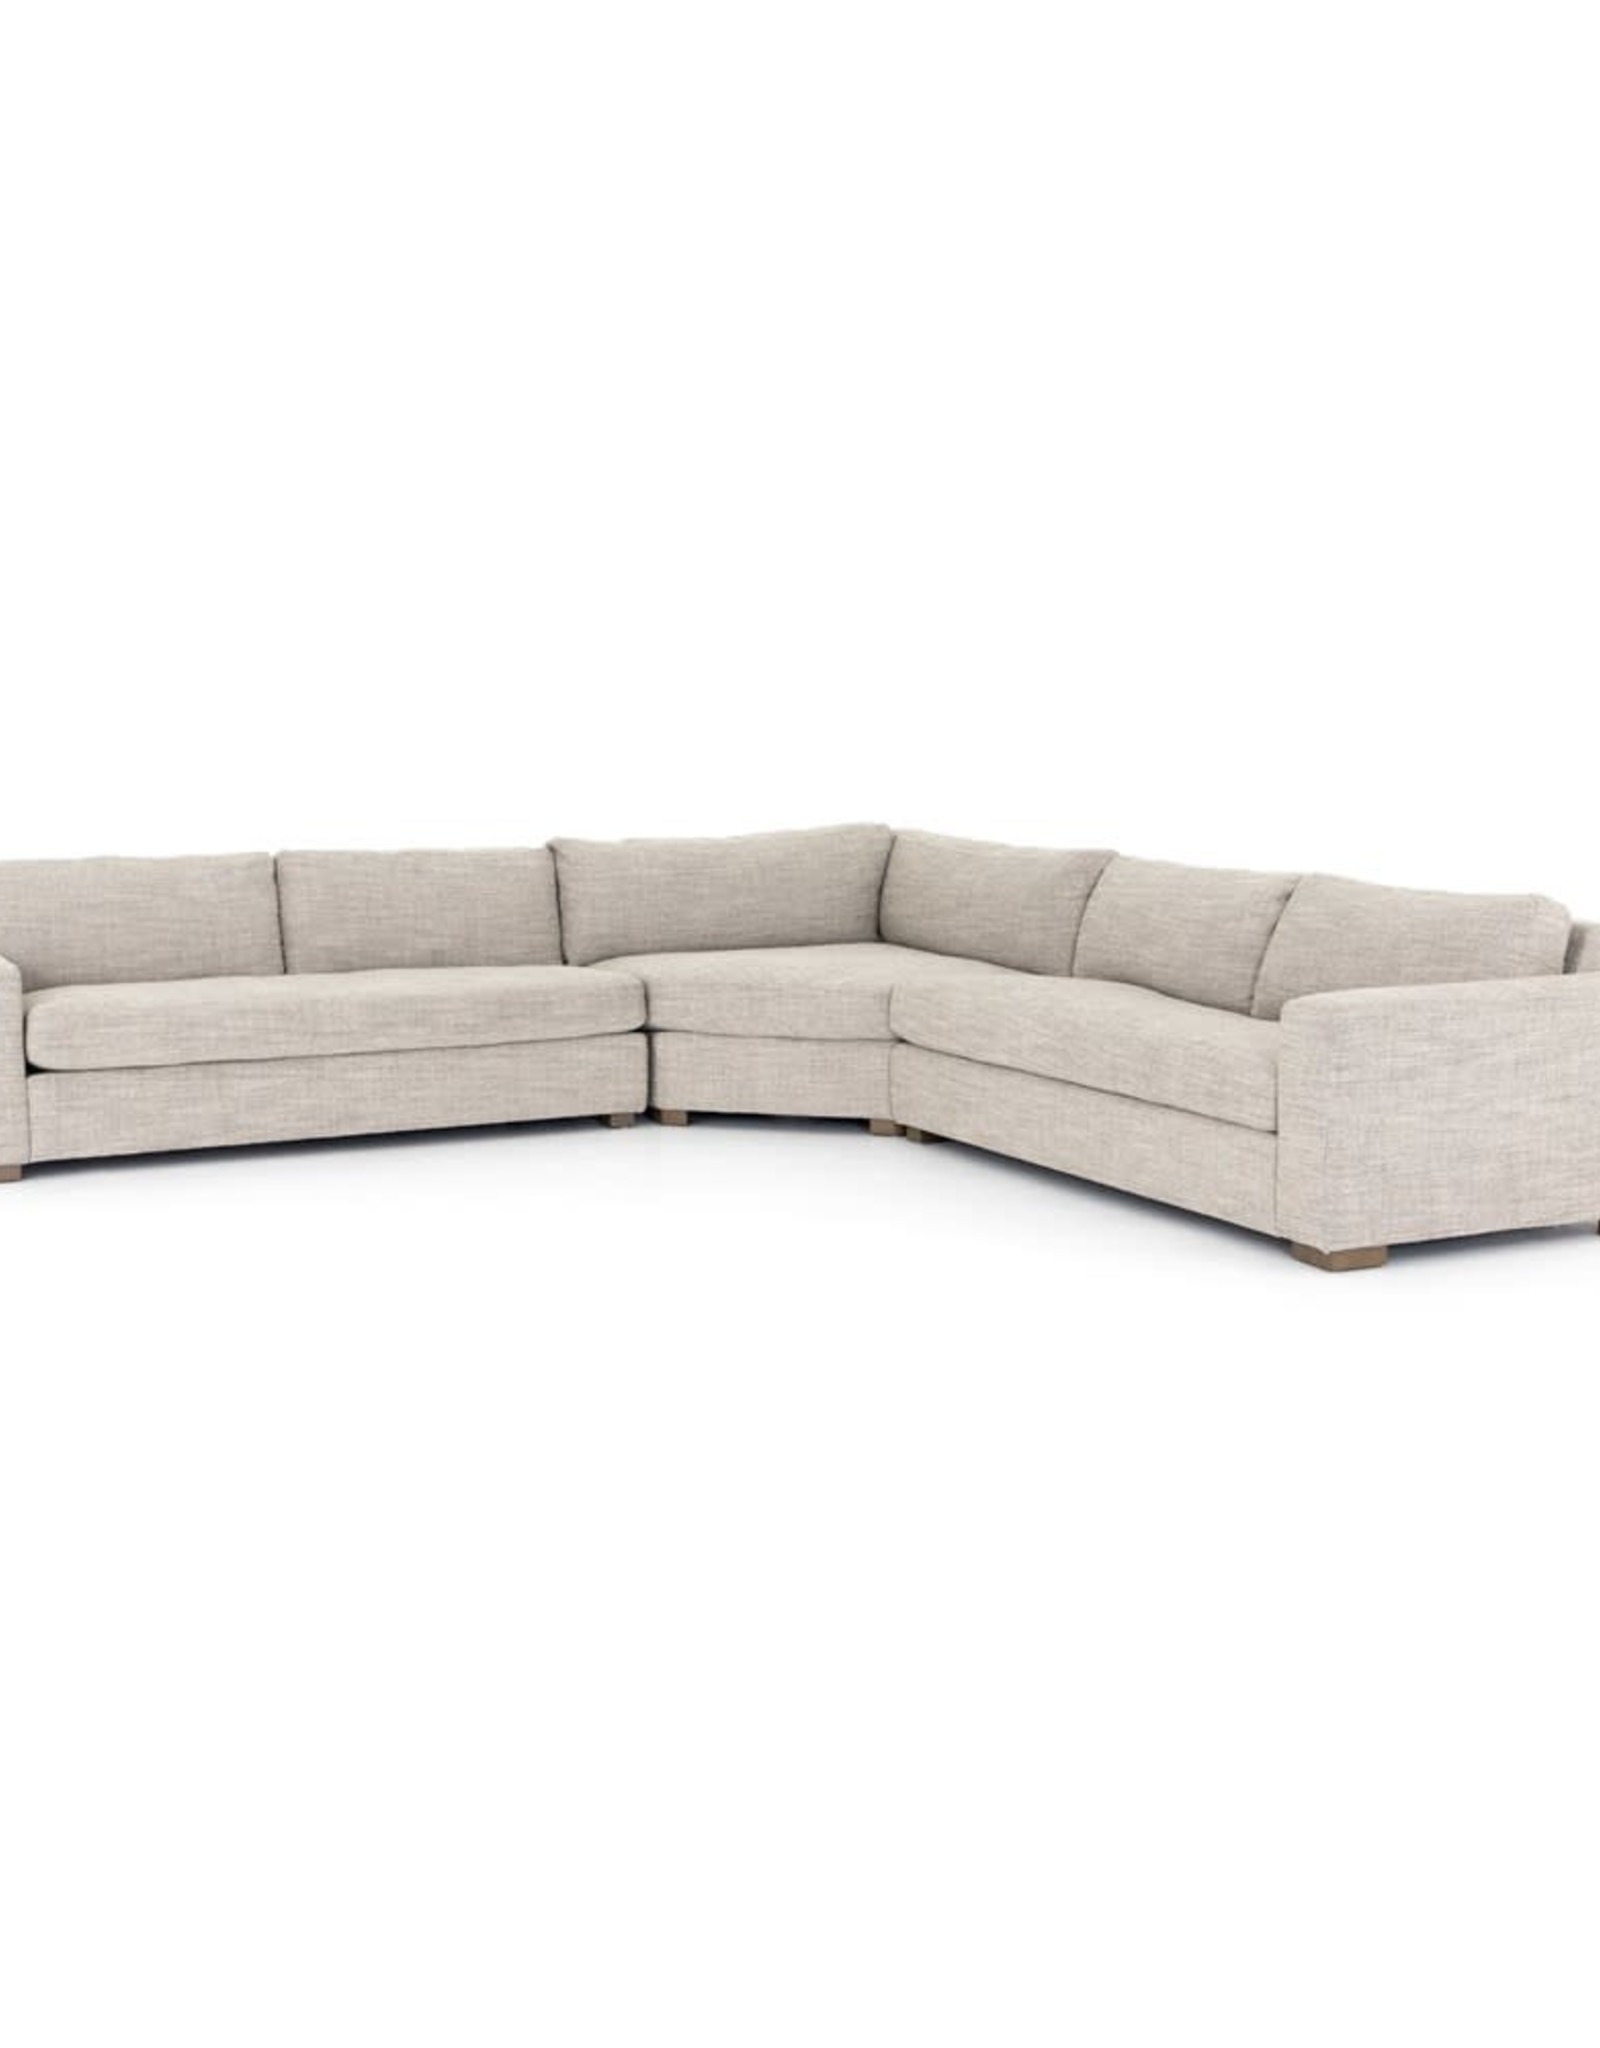 Boone 3-piece Sectional